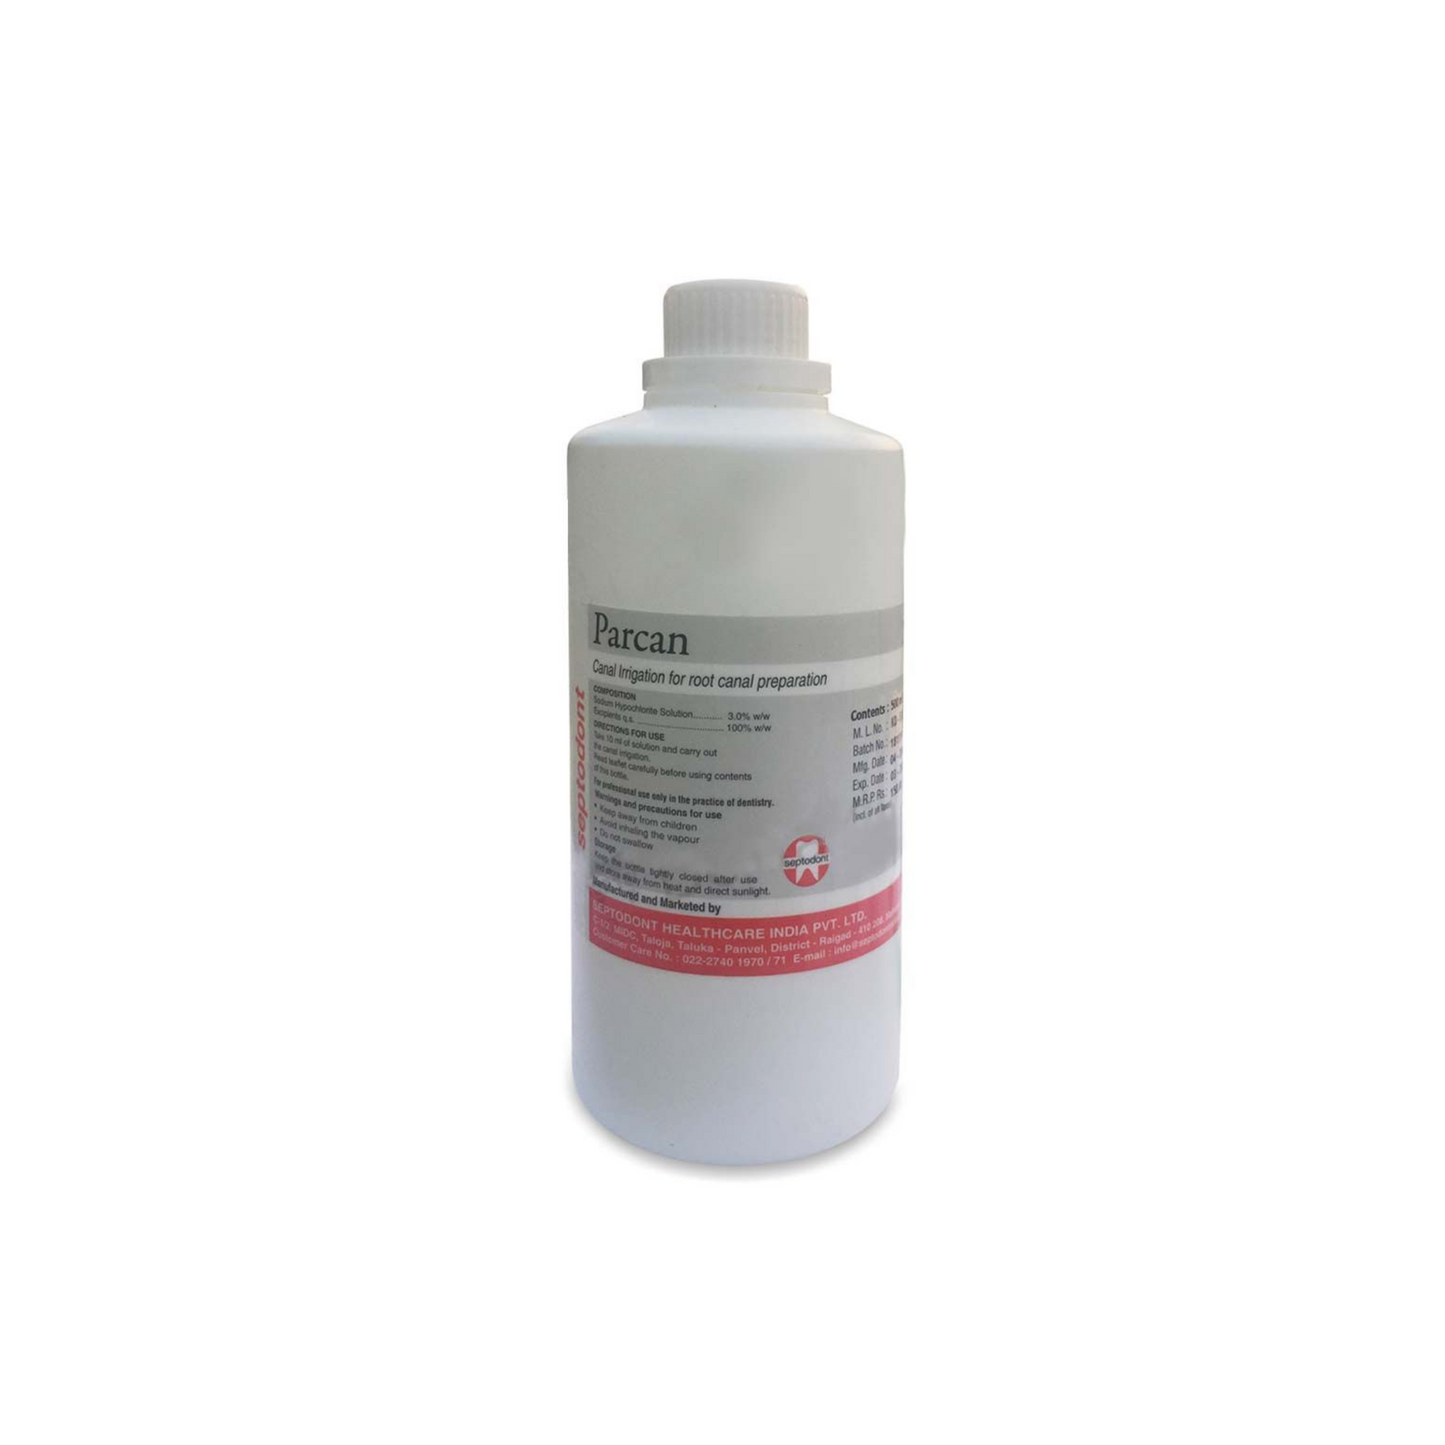 Septodont Parcan Sodium Hypochlorite Solution – Occlusion